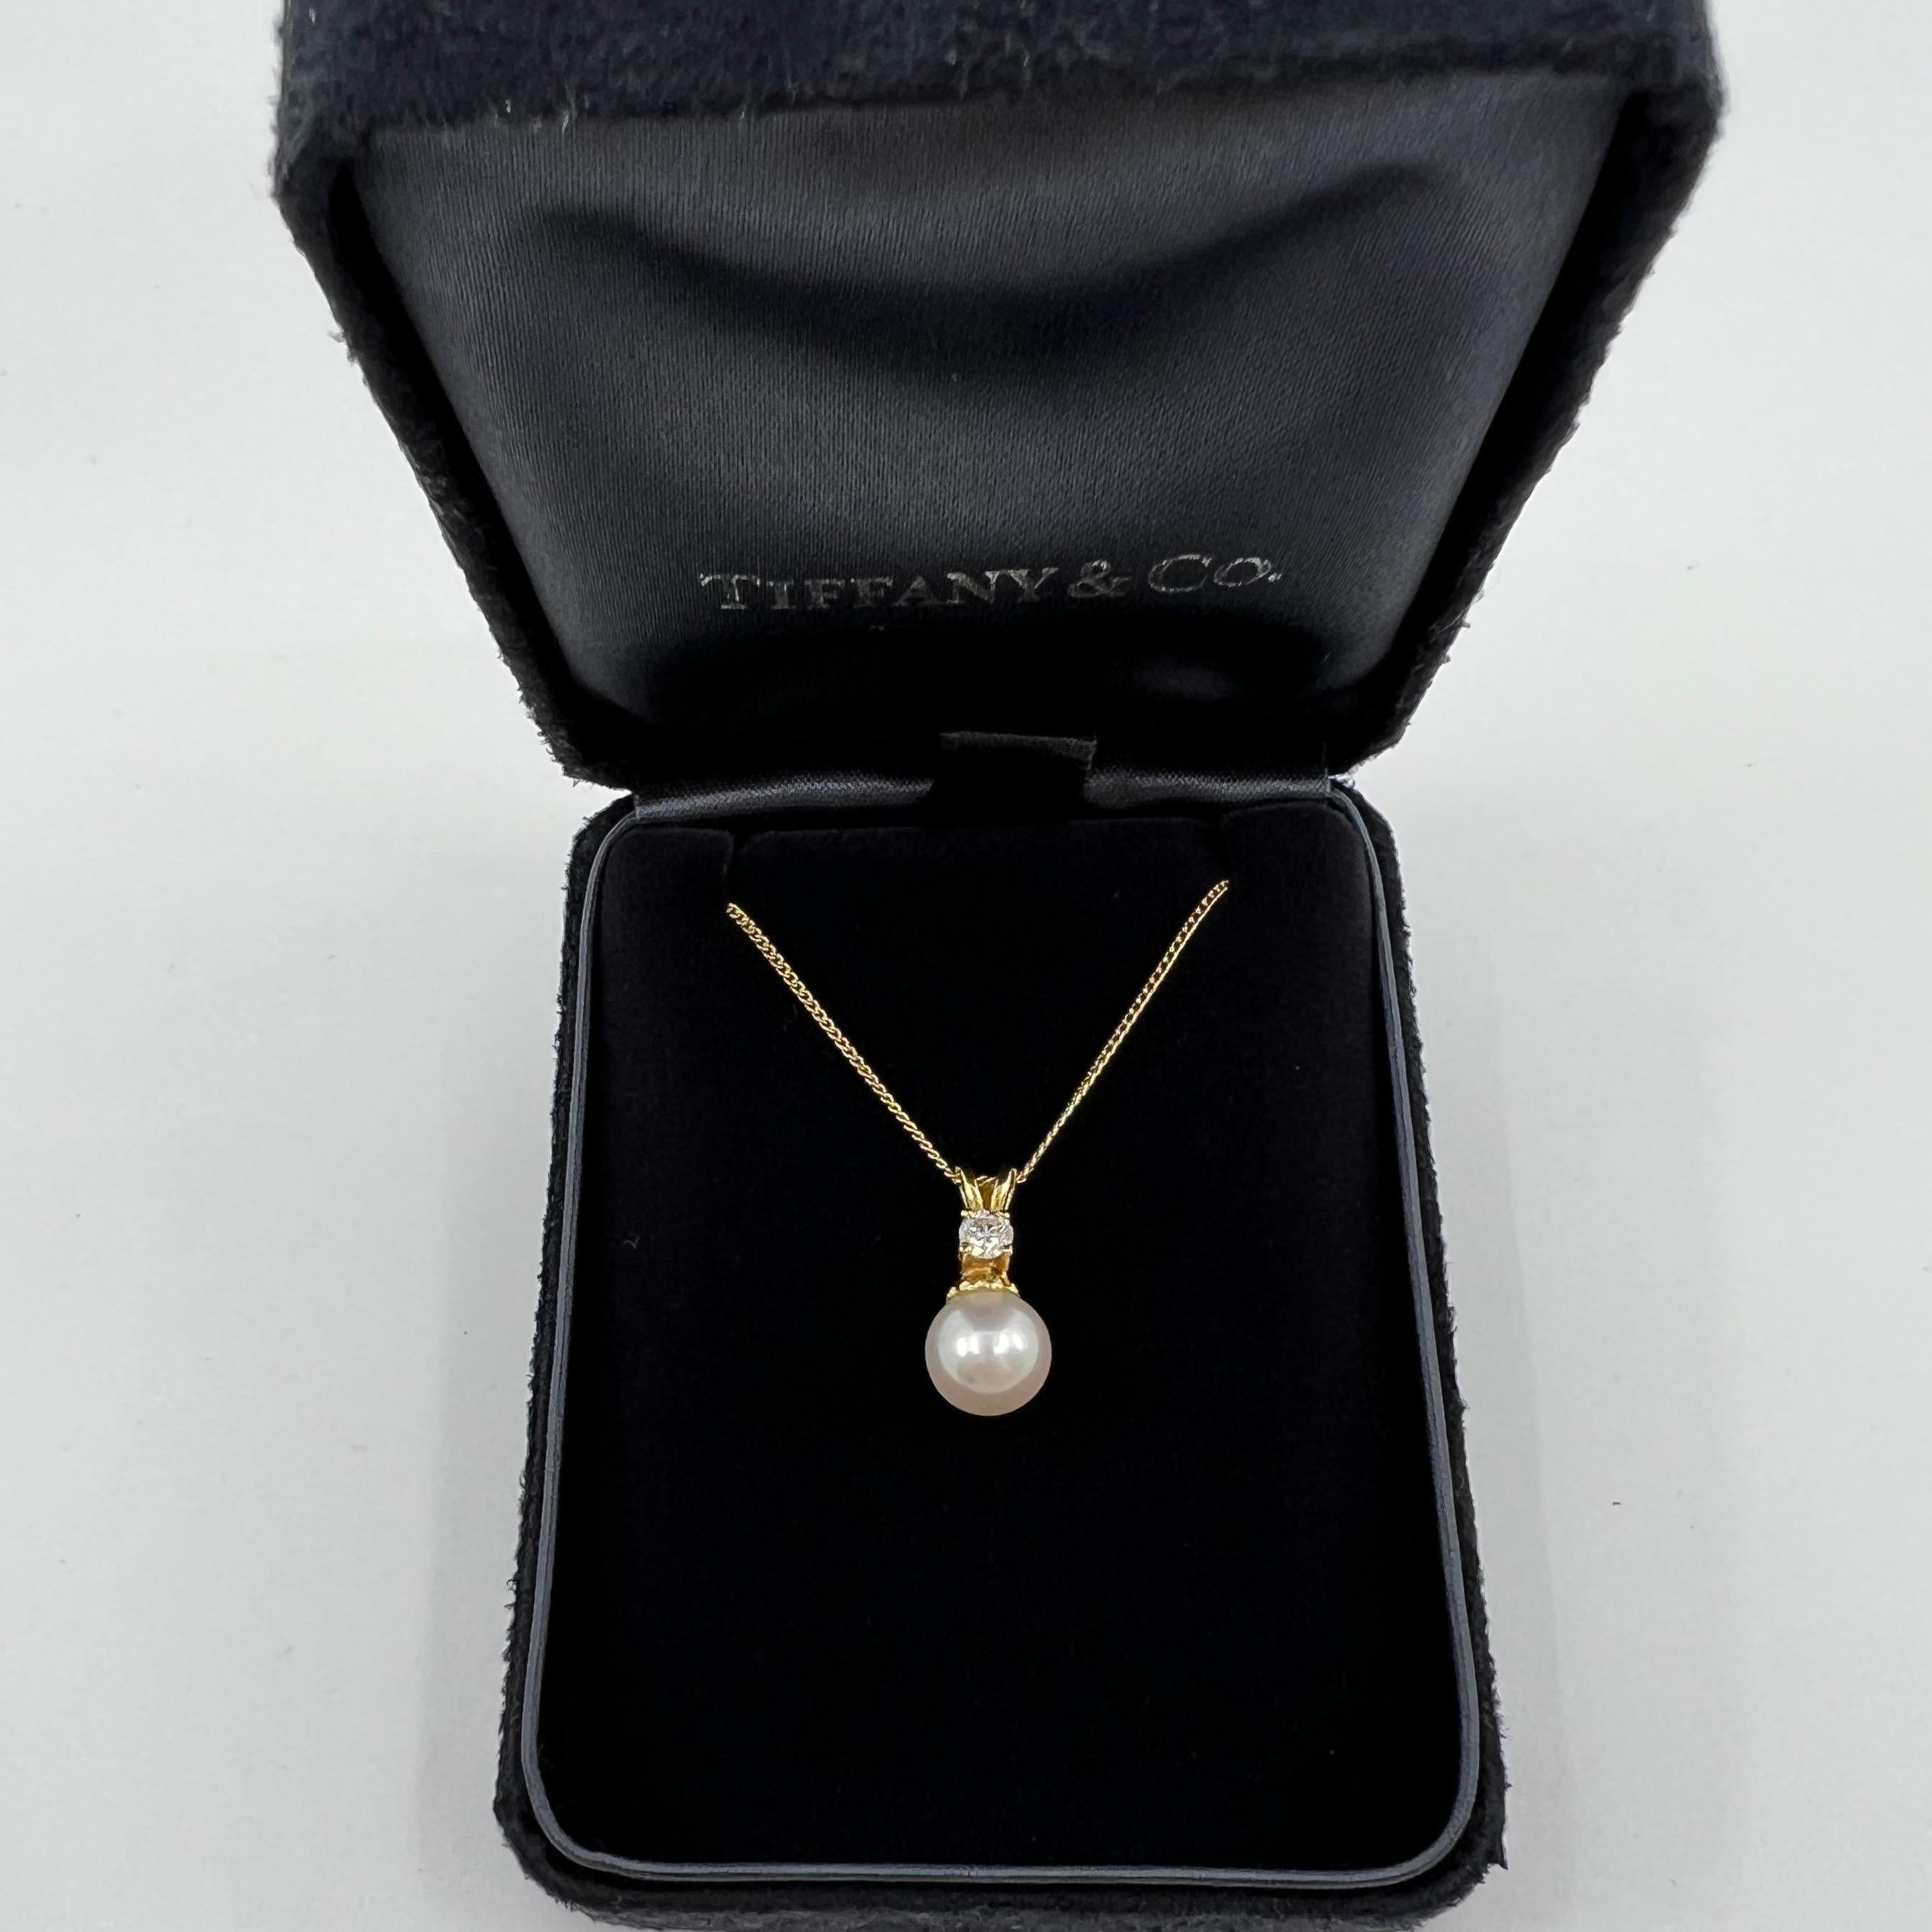 Rare Tiffany & Co. White Pearl And Diamond 18k Yellow Gold Pendant Necklace.

Beautiful 7.8mm white cultured pearl accented by a 3.2mm natural round brilliant cut diamond. Approx. VS clarity E/F colour.

Fine jewellery houses like Tiffany only use